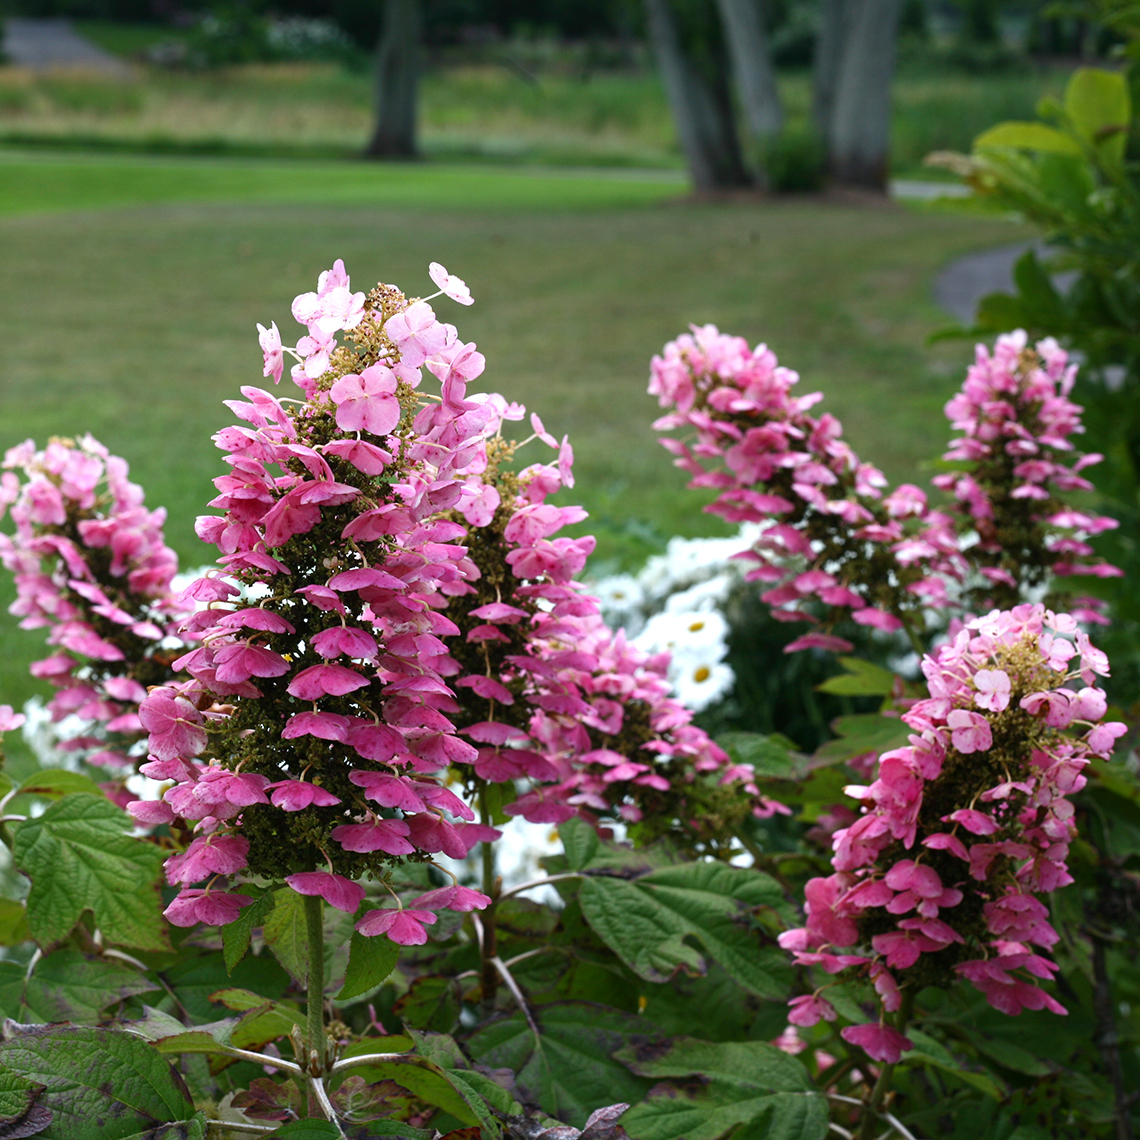 The deep pink phase of Gatsby Pink oakleaf hydrangea lacecap flowers